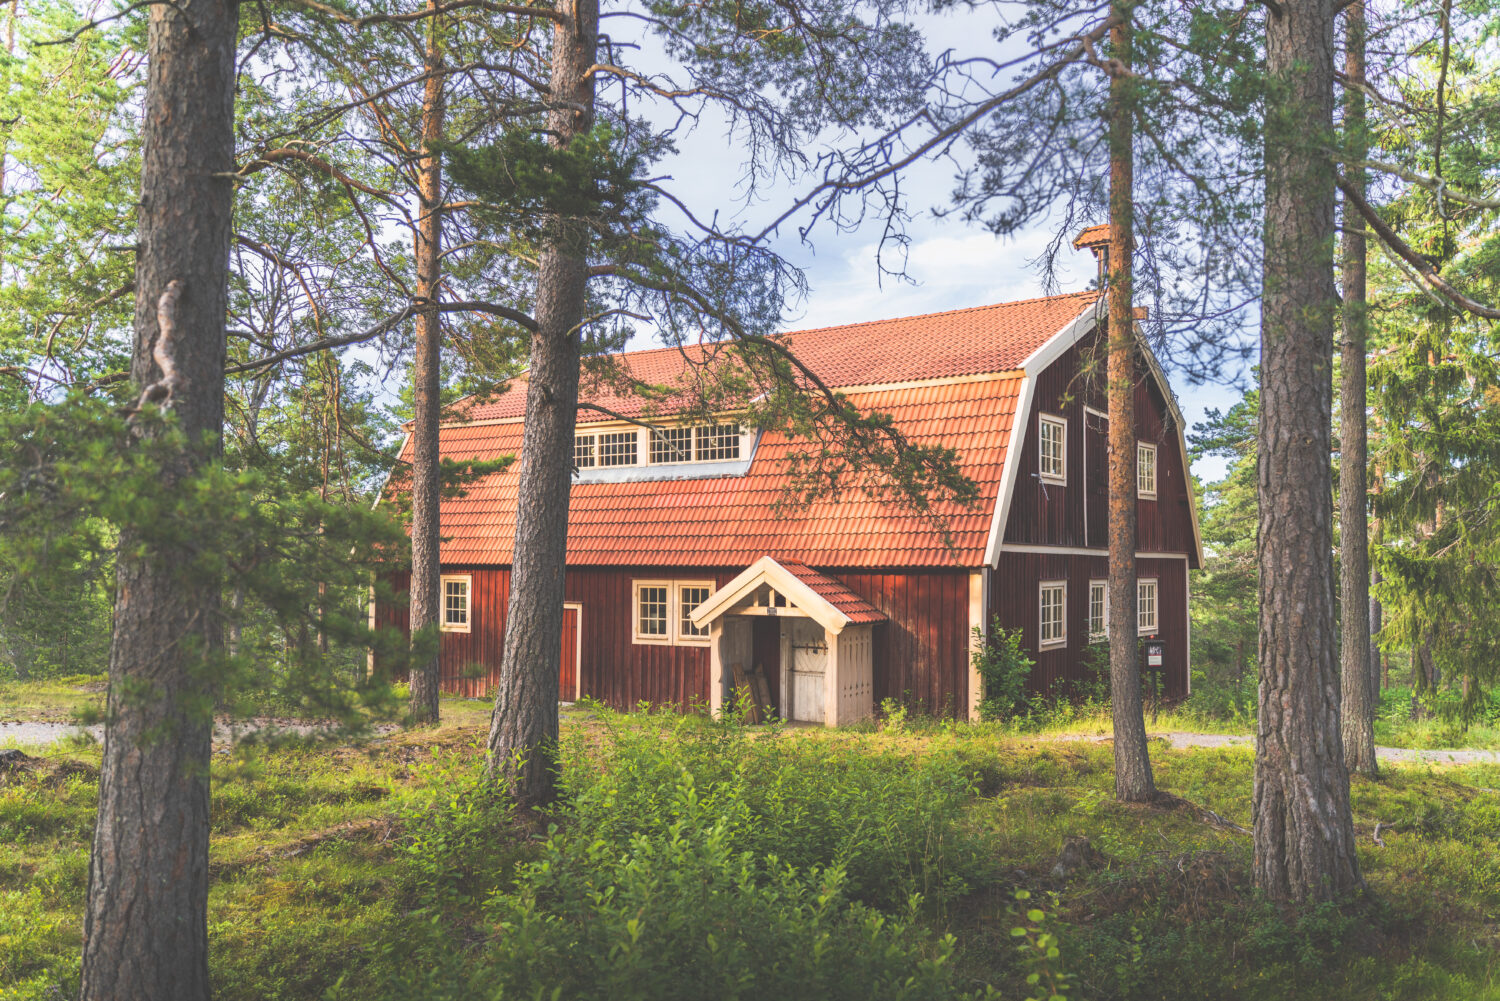 Traditional farm on Norra Berget